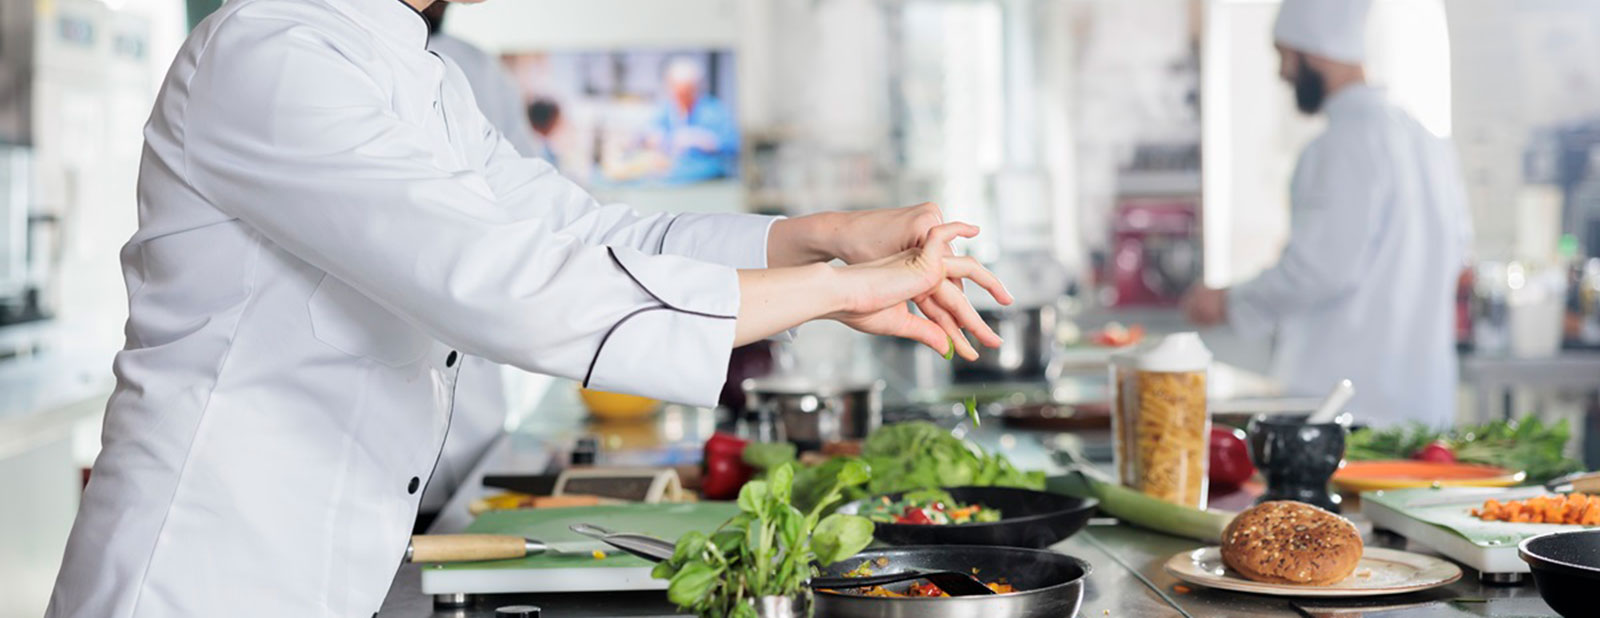 How Does a Culinary Diploma from Delhi Boost Your Job Prospects?